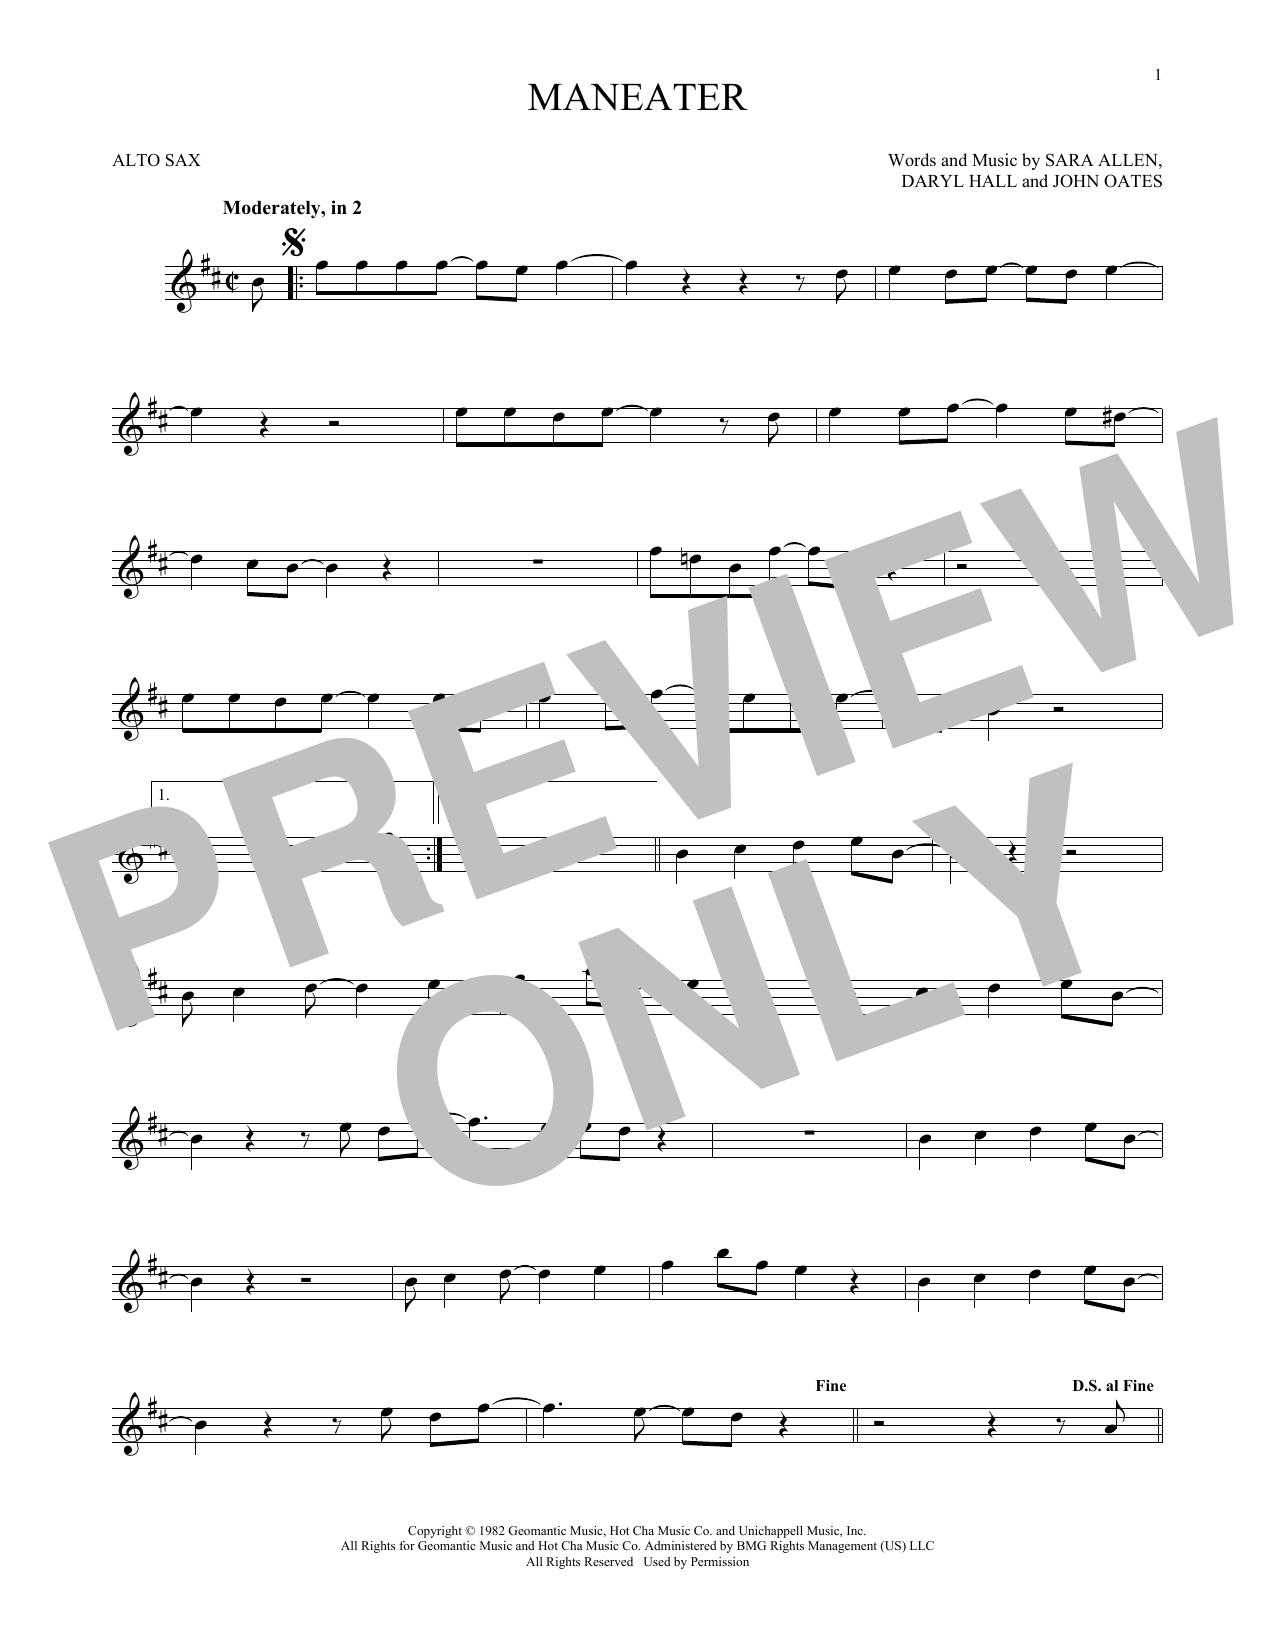 Download Hall & Oates Maneater Sheet Music